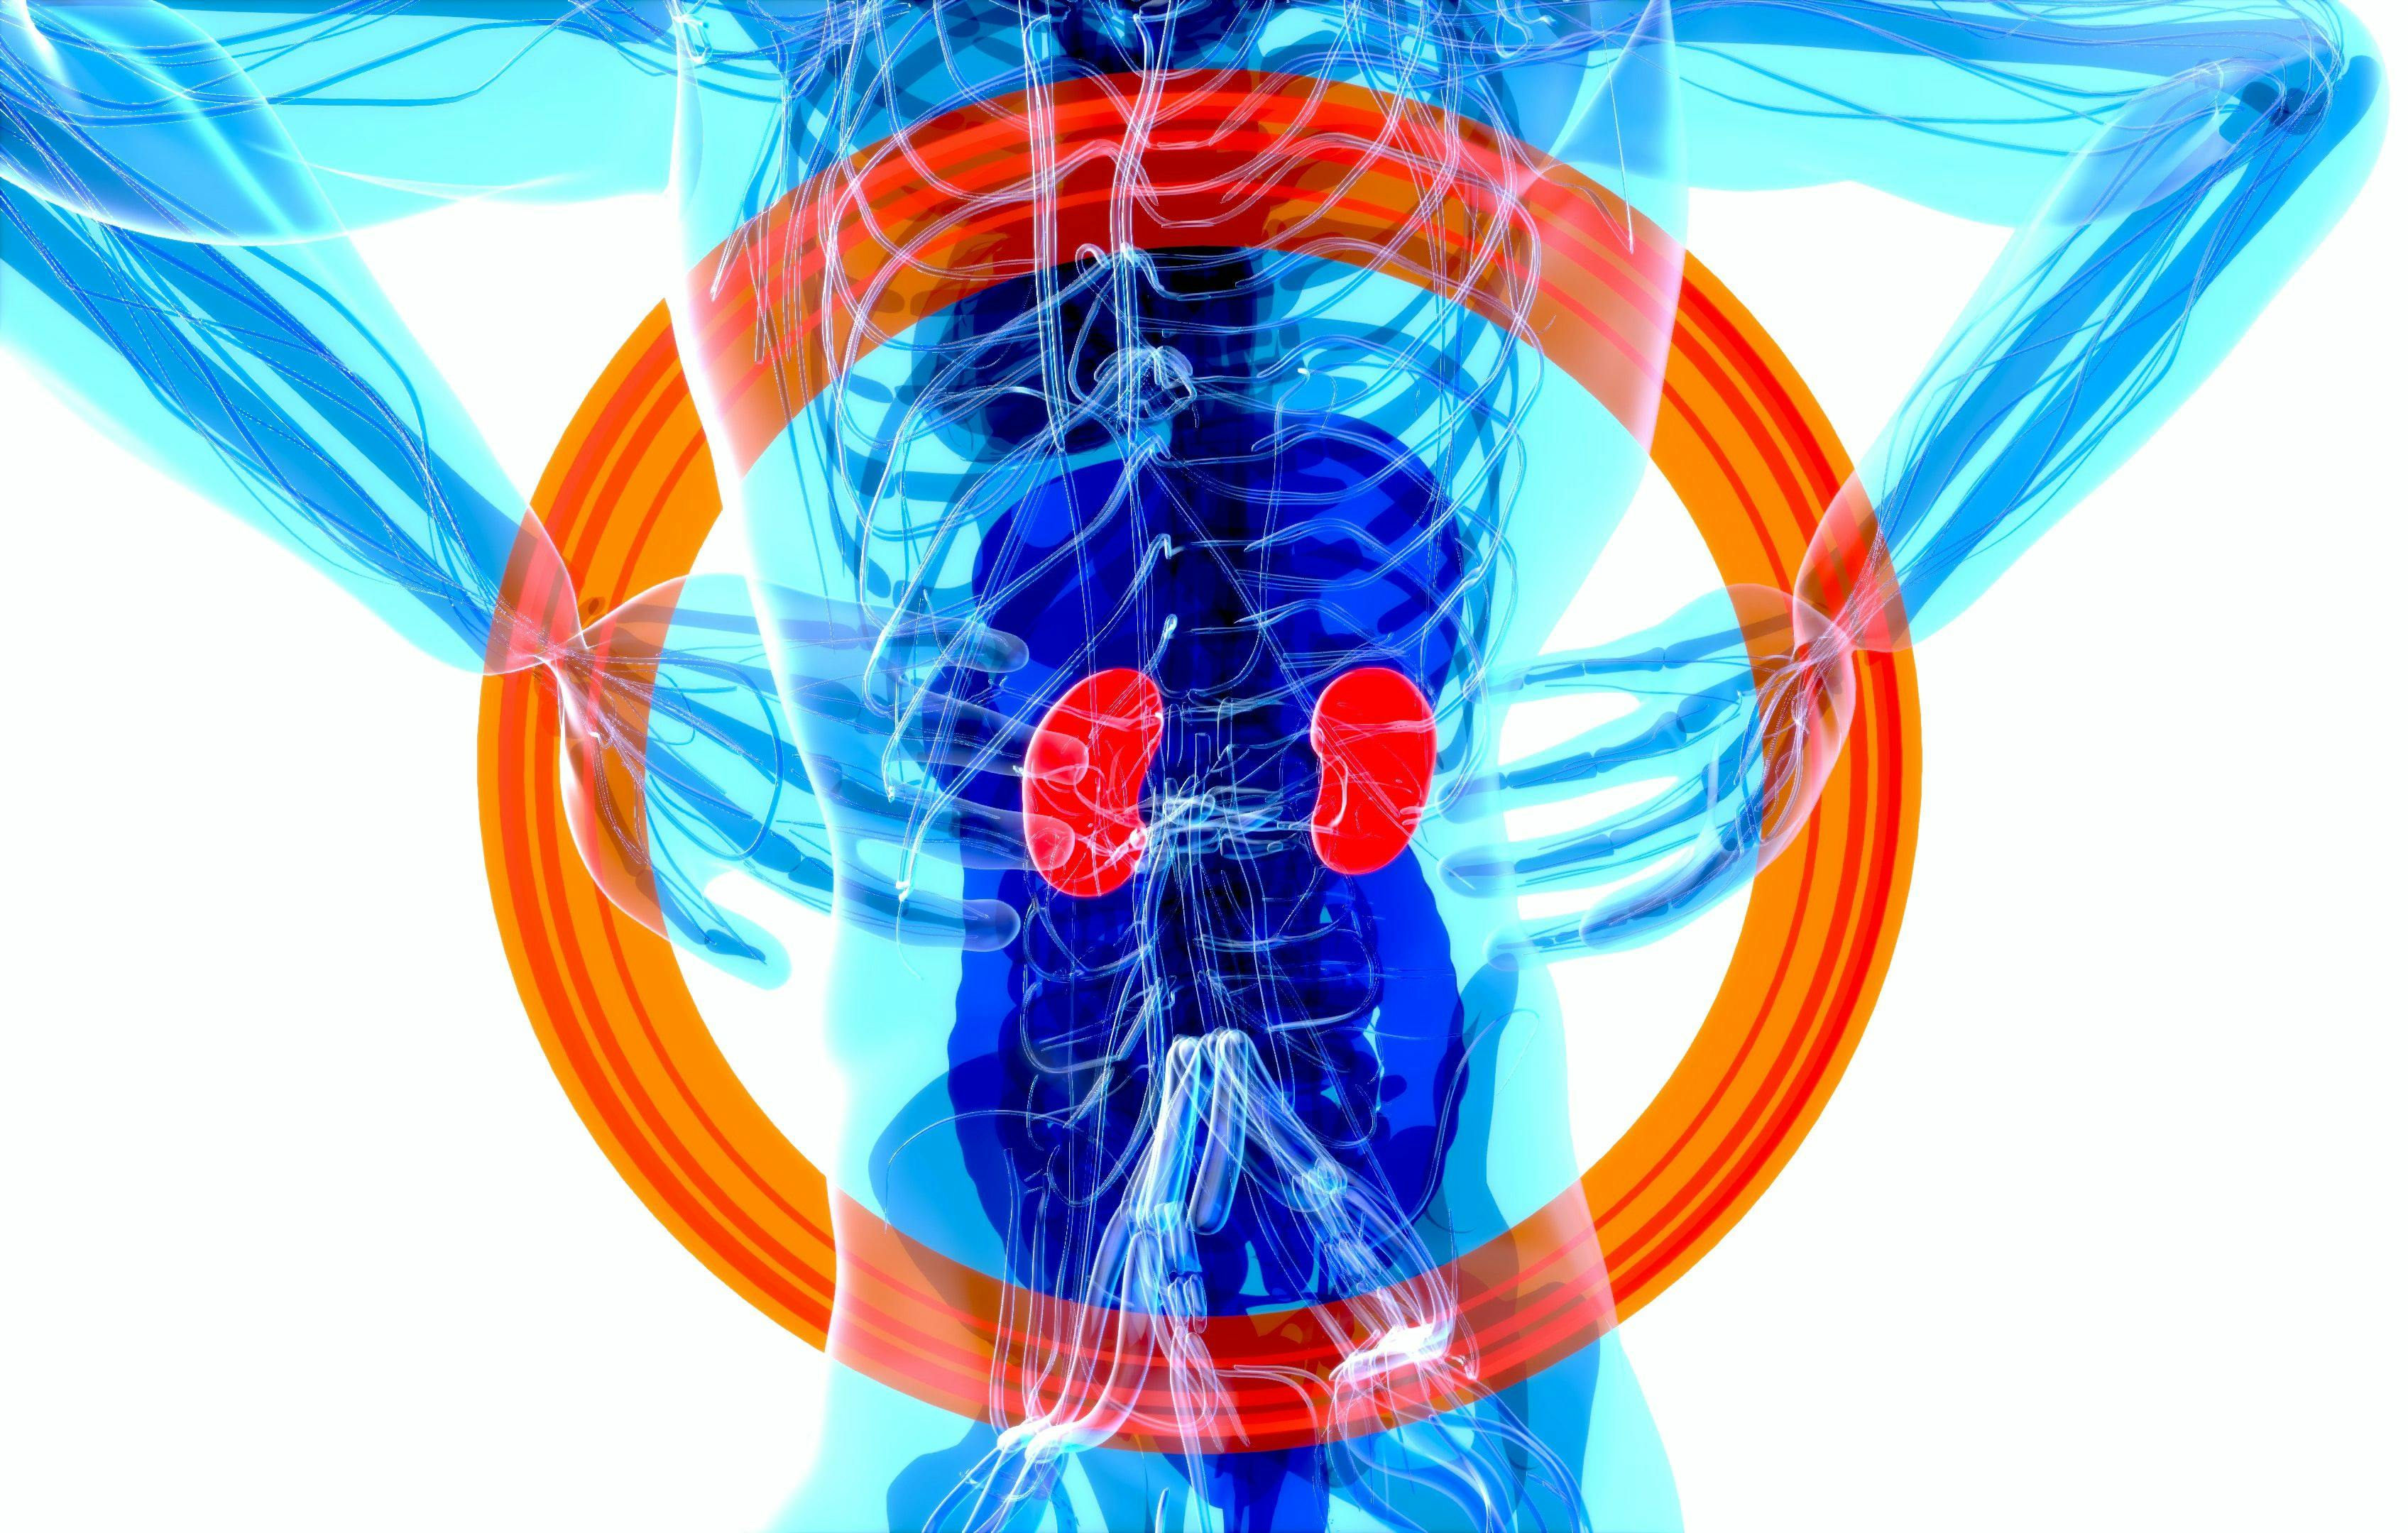 New Vancomycin Regimen Recommended for Overweight Patients with Renal Insufficiency